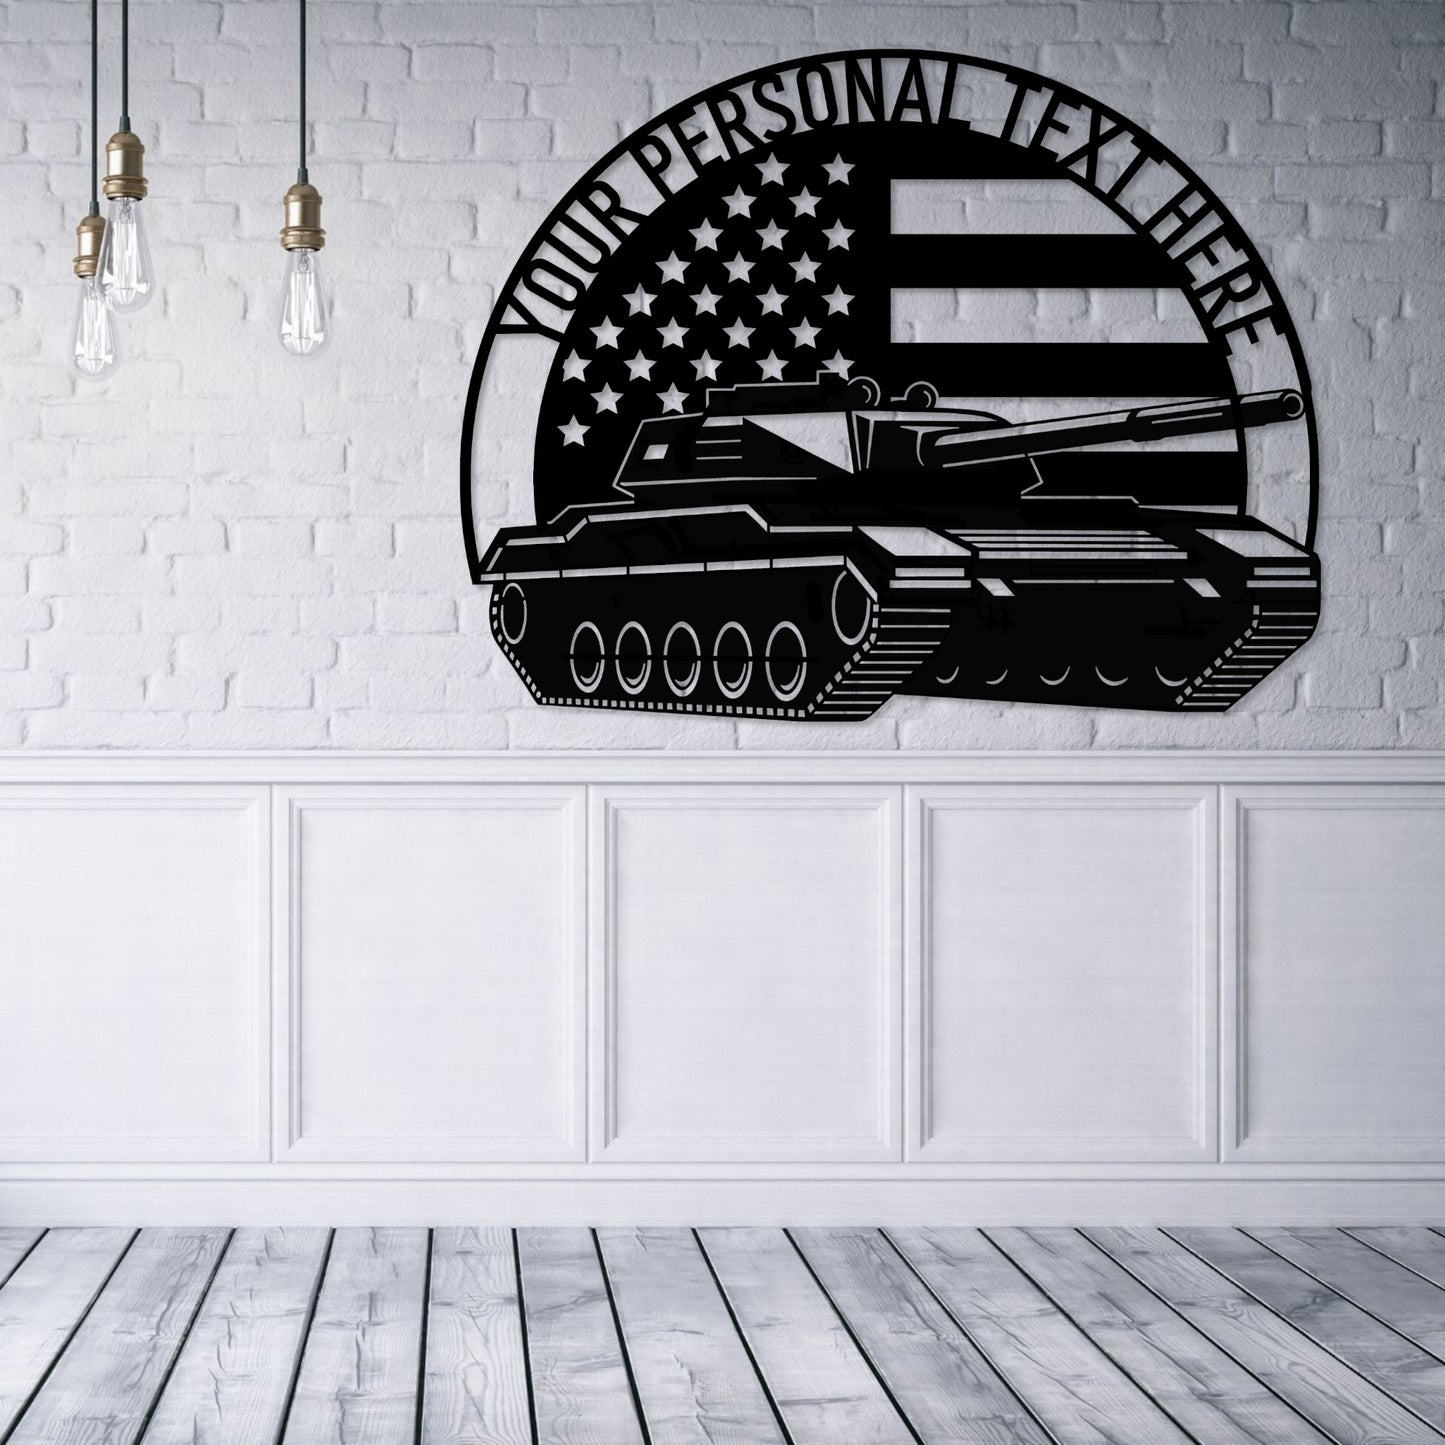 Personalized Patriotic US Battle Tank Metal Sign. Military Combat Vehicle Wall Decor Gift. Army Tank Wall Hanging. US Soldier Veteran Gift. 